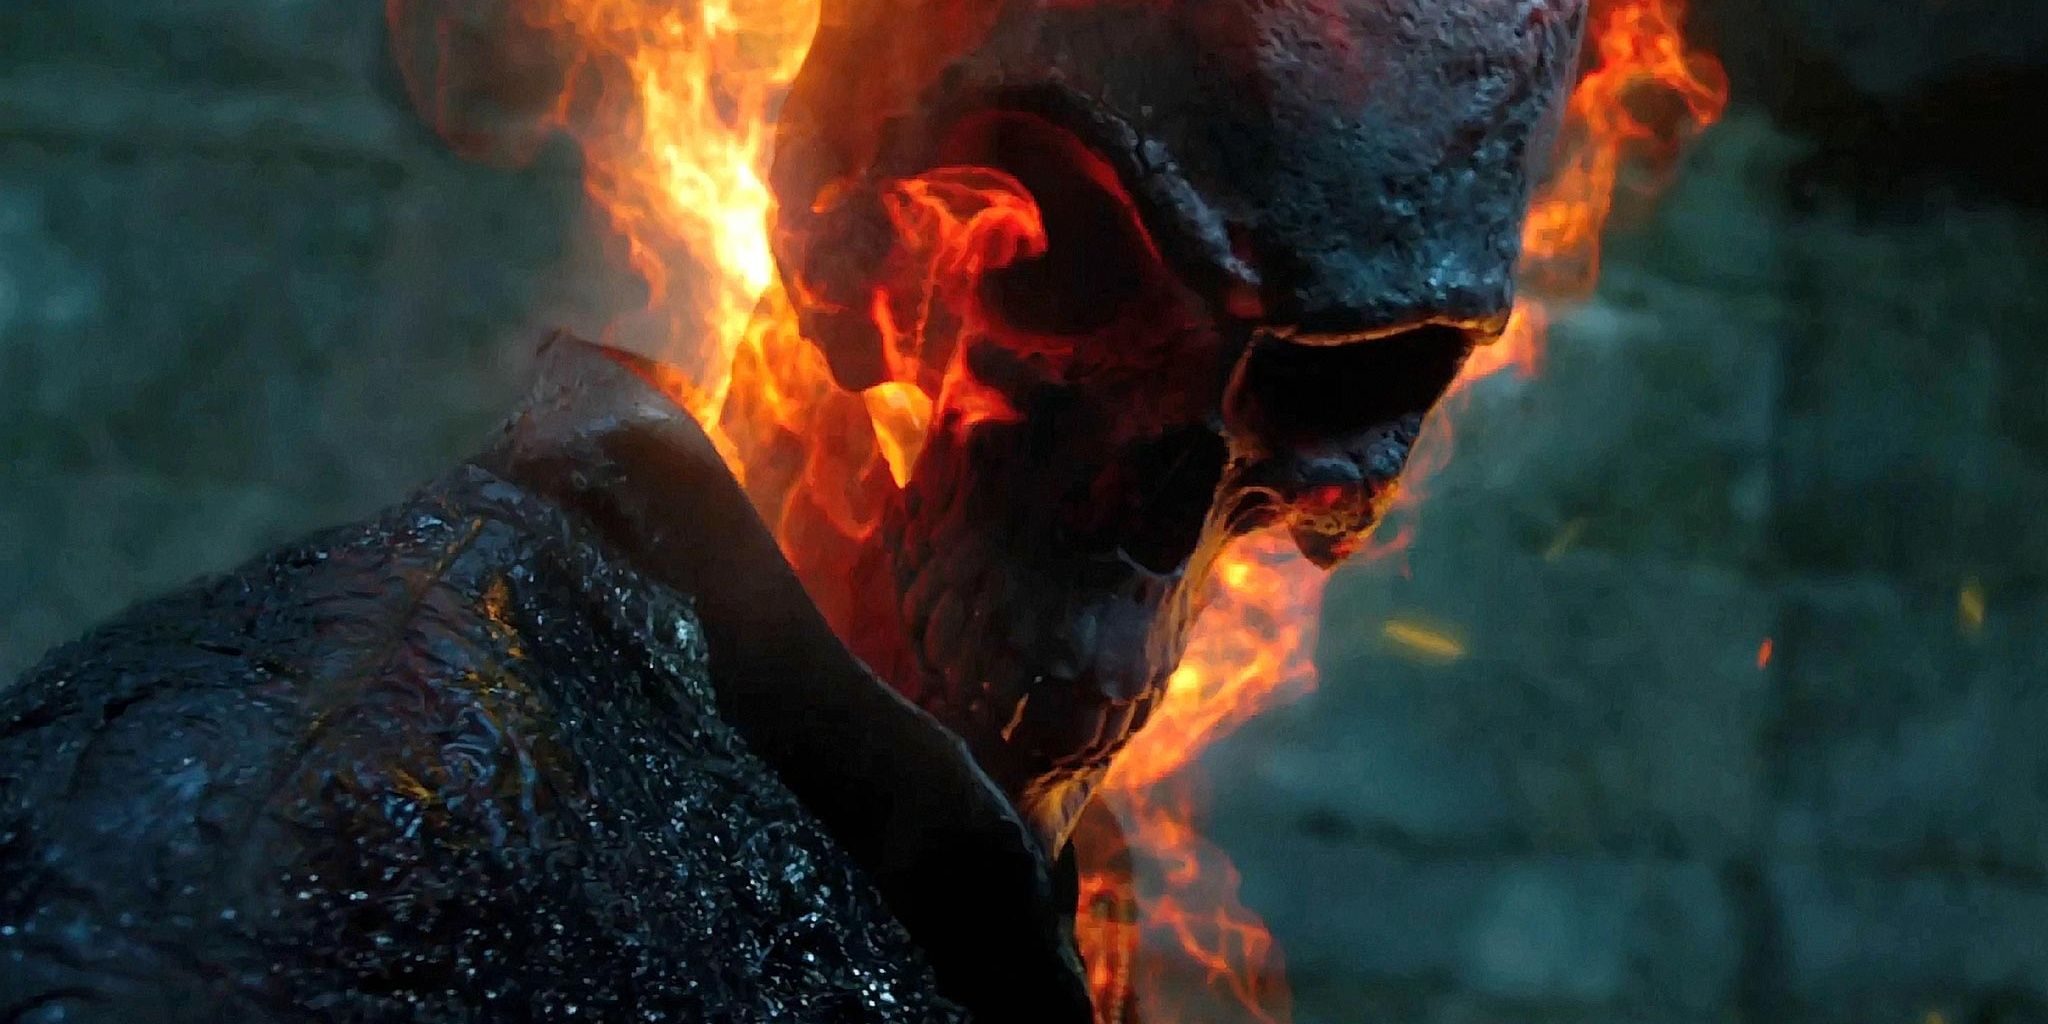 Nic Cage turns into Ghost Rider in Spirit of Vengeance